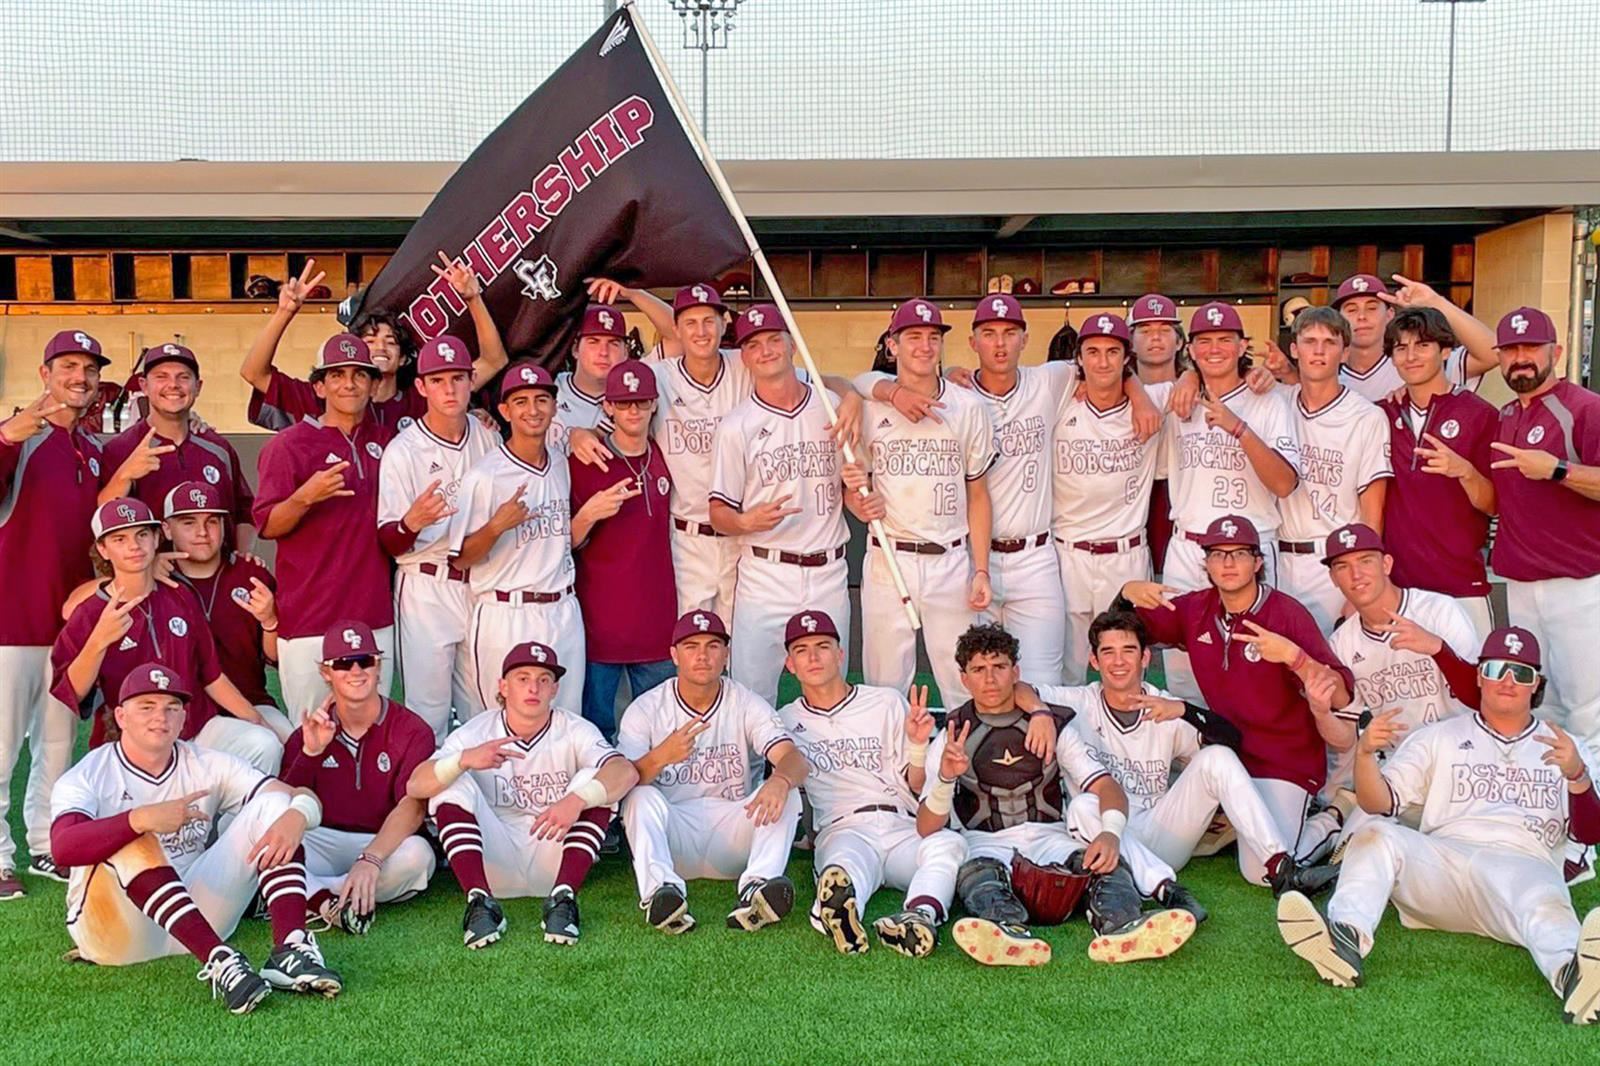 The Cy-Fair High School baseball team swept Houston Heights to advance to the area round. The Bobcats will face Katy Taylor.